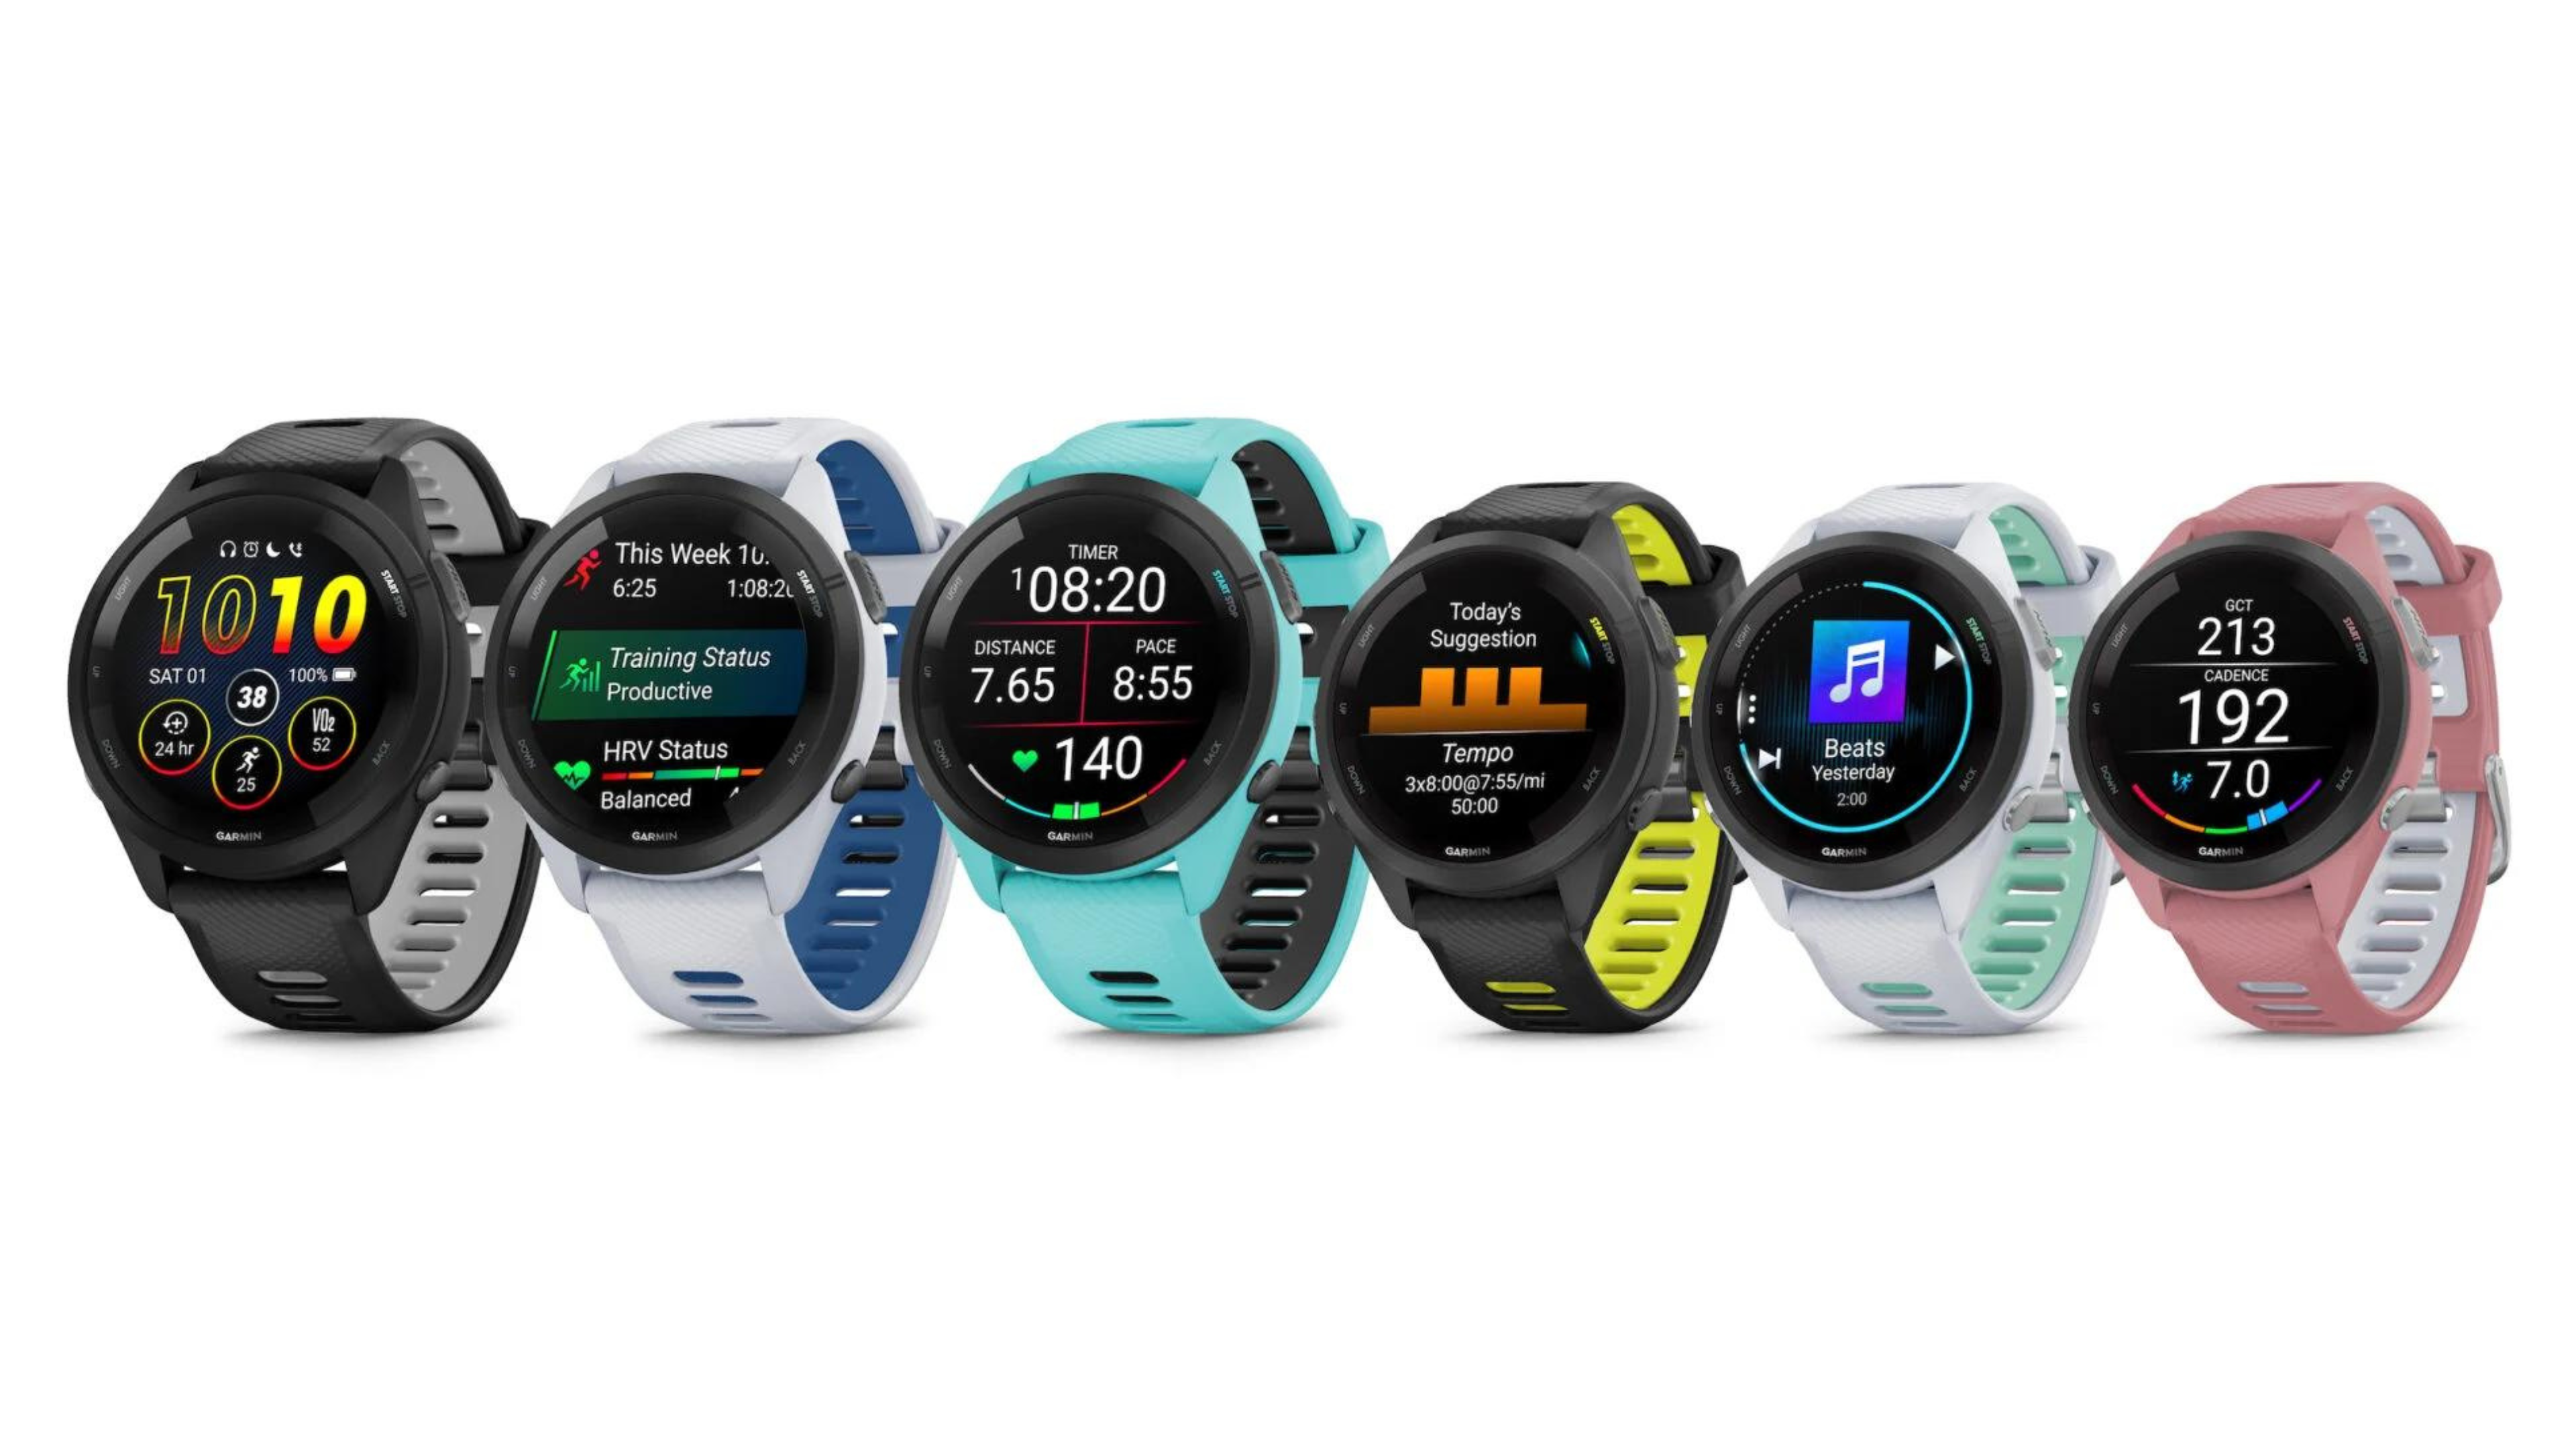 Garmin Forerunner 965 and Forerunner 265 running watches in all color variants